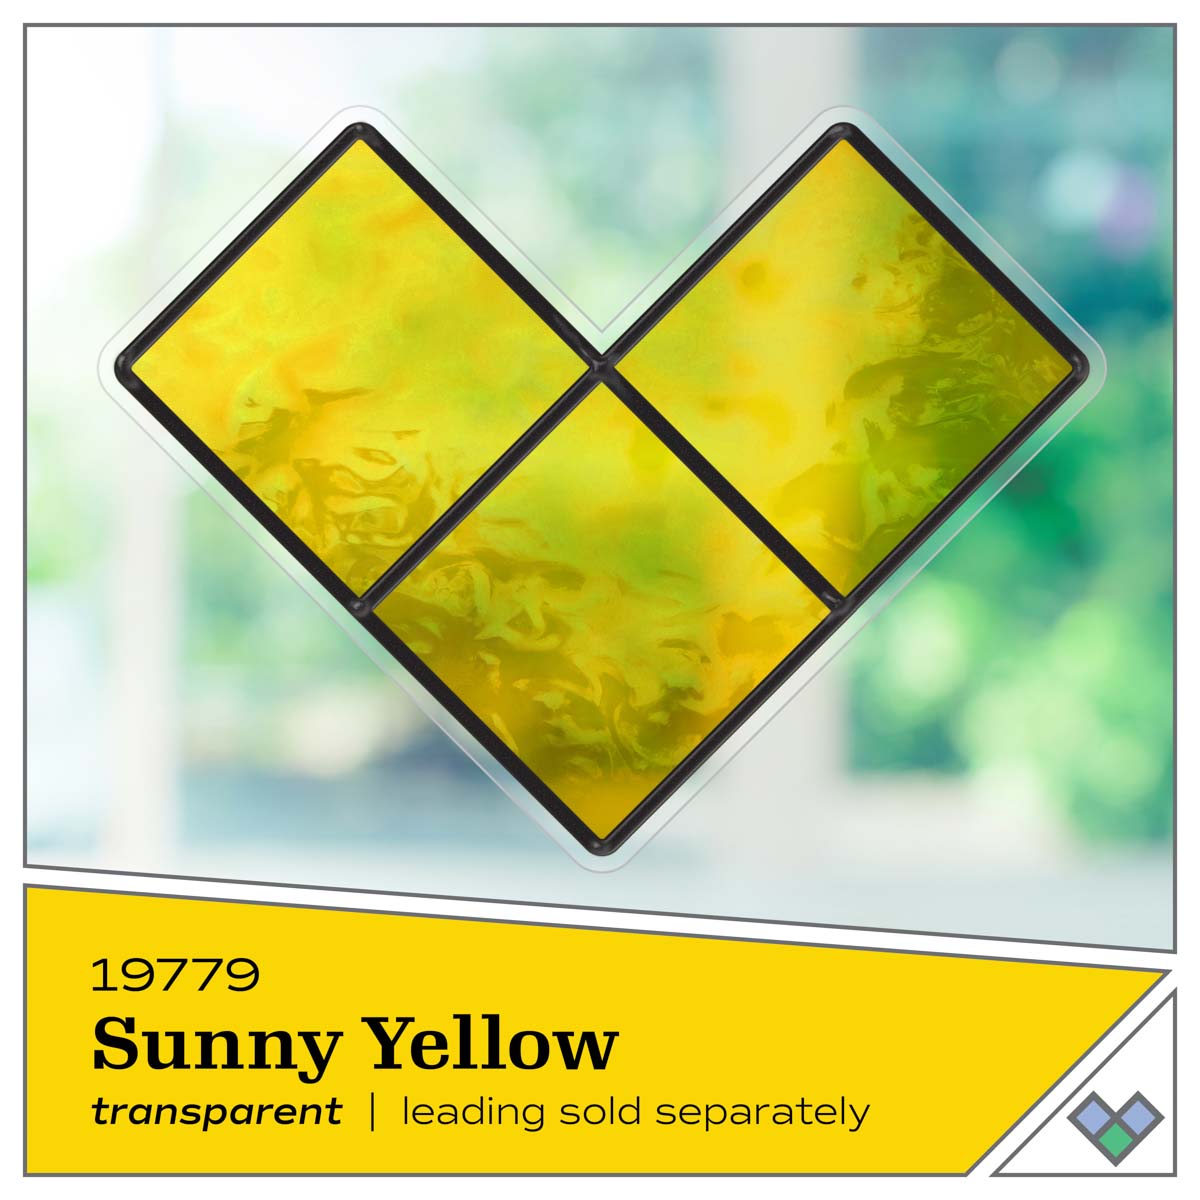 Gallery Glass ® Stained Glass Effect Paint - Sunny Yellow, 2 oz. - 19779